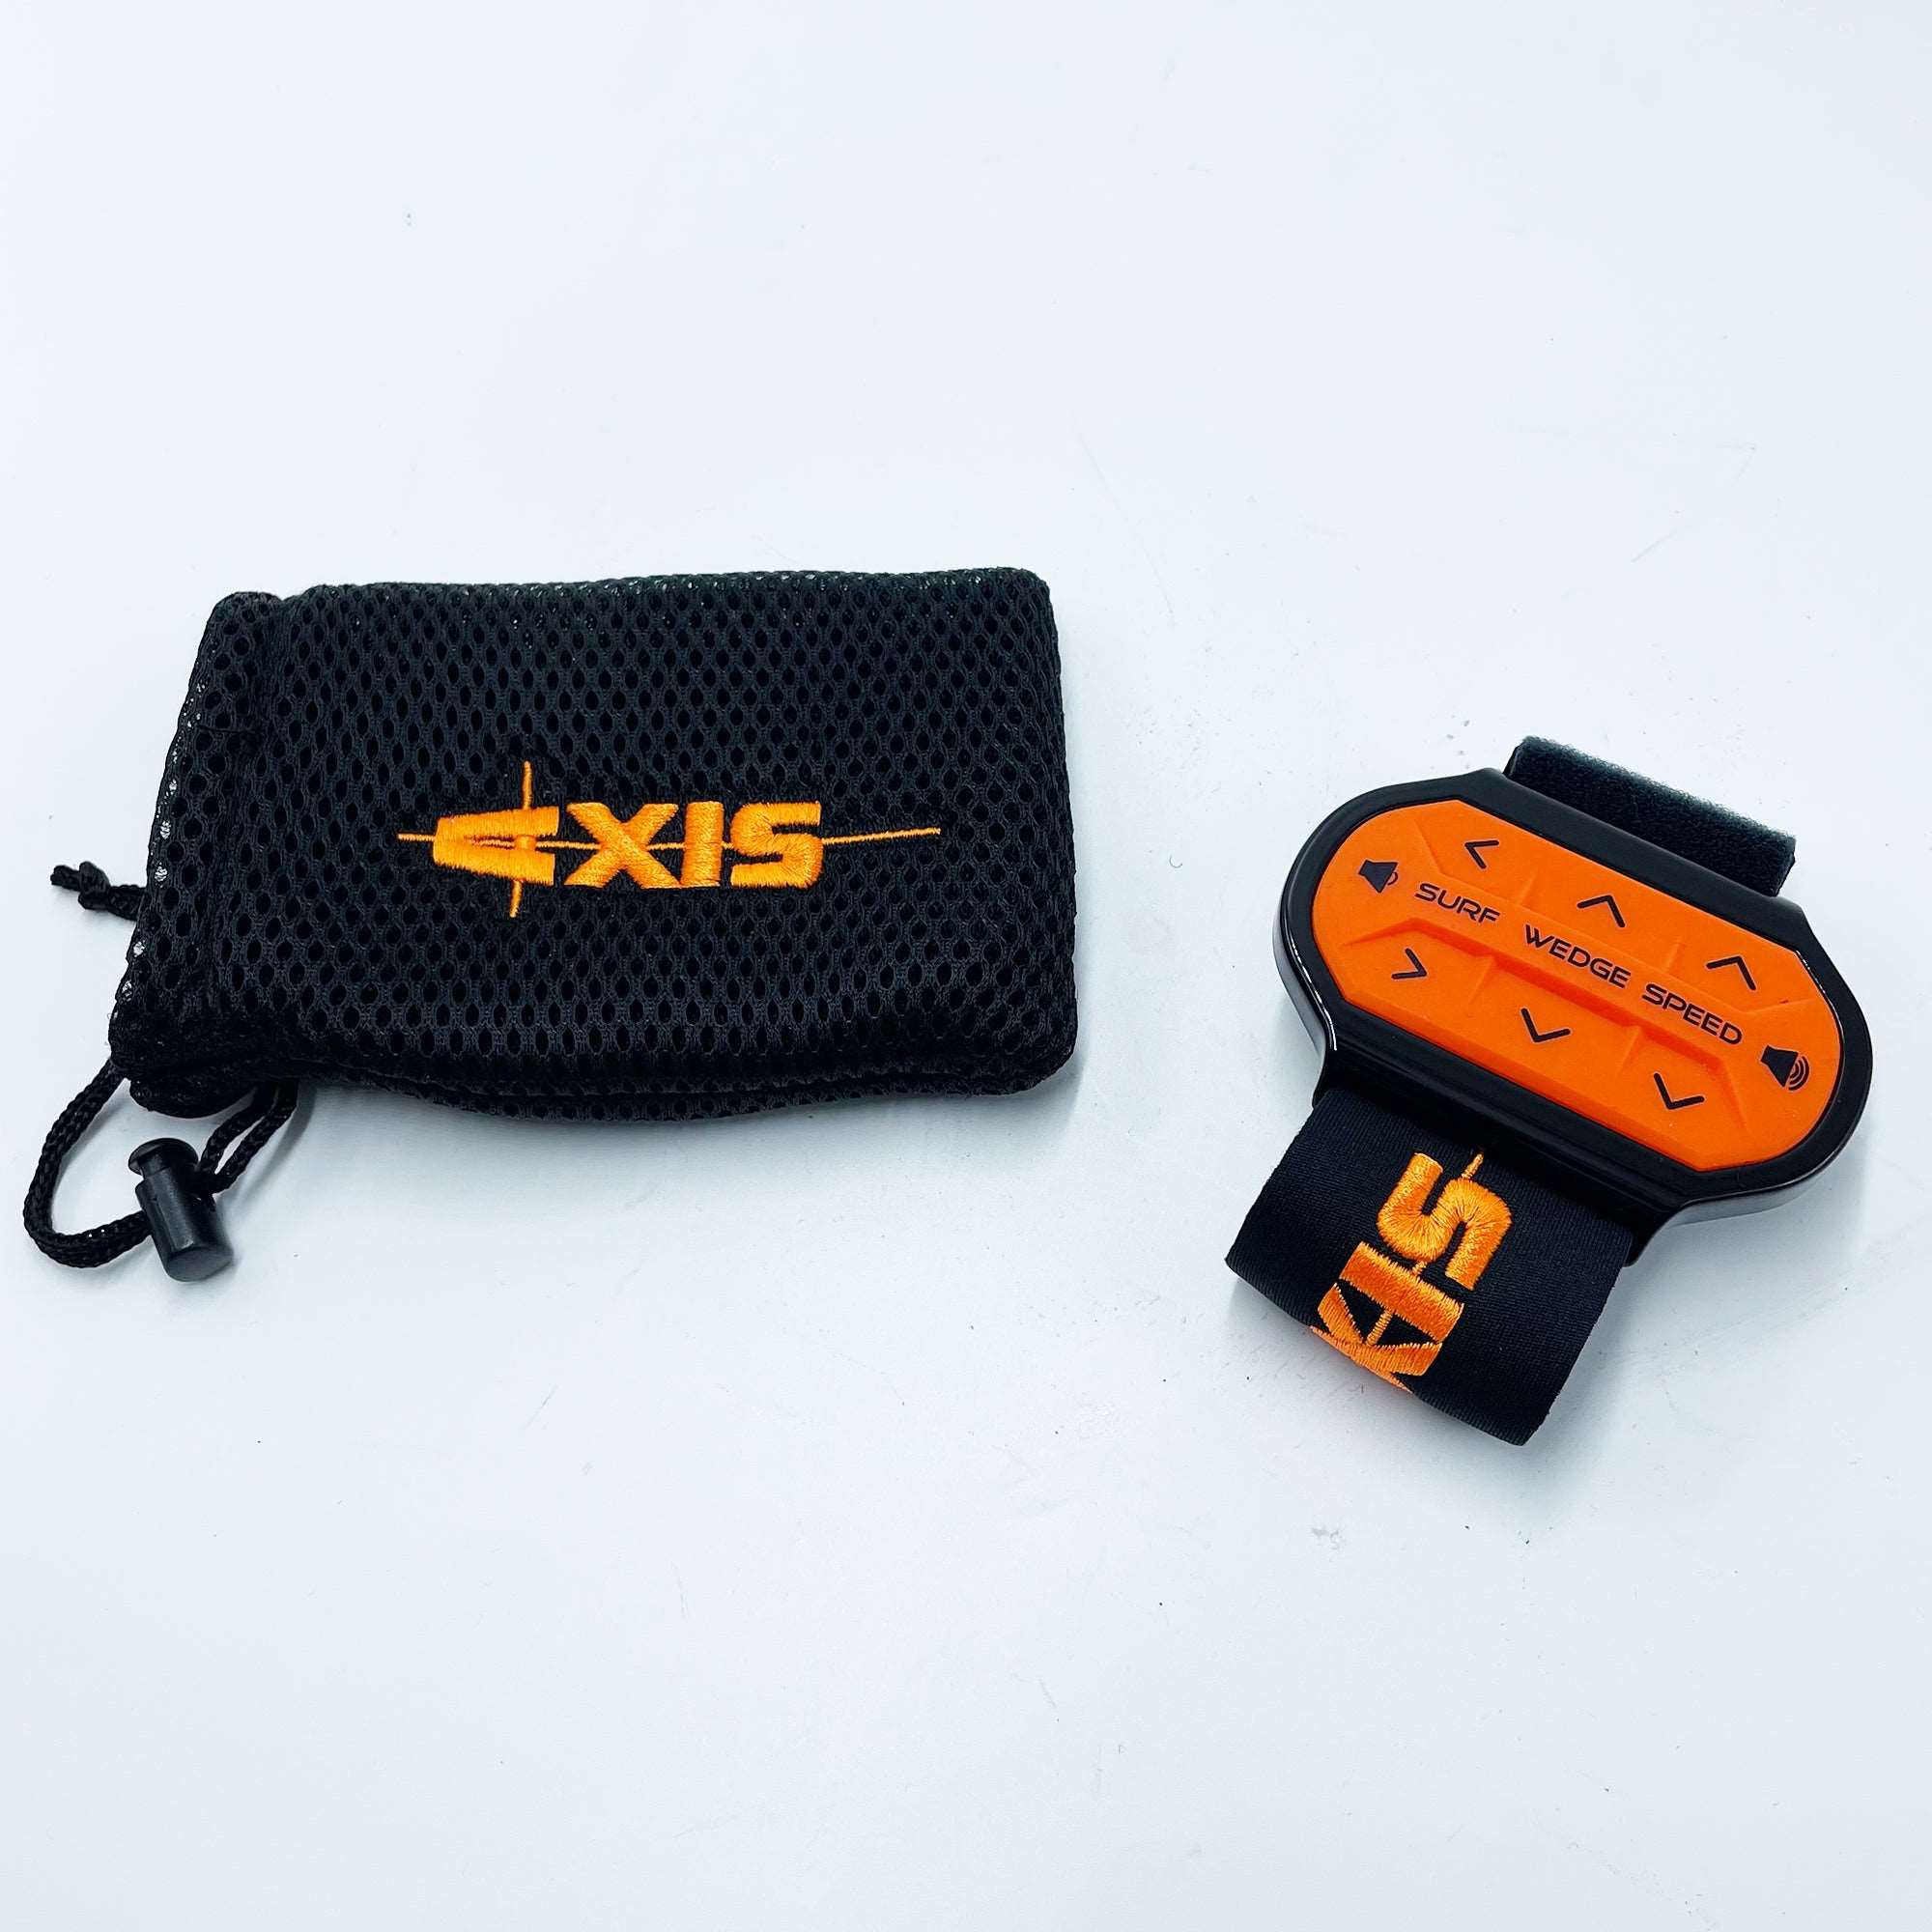 A black pouch with an orange and black Axis logo on it, designed for wake transfers remotely and boat speed adjustment, the Axis Wake Surf Band 2018- is perfect for you.